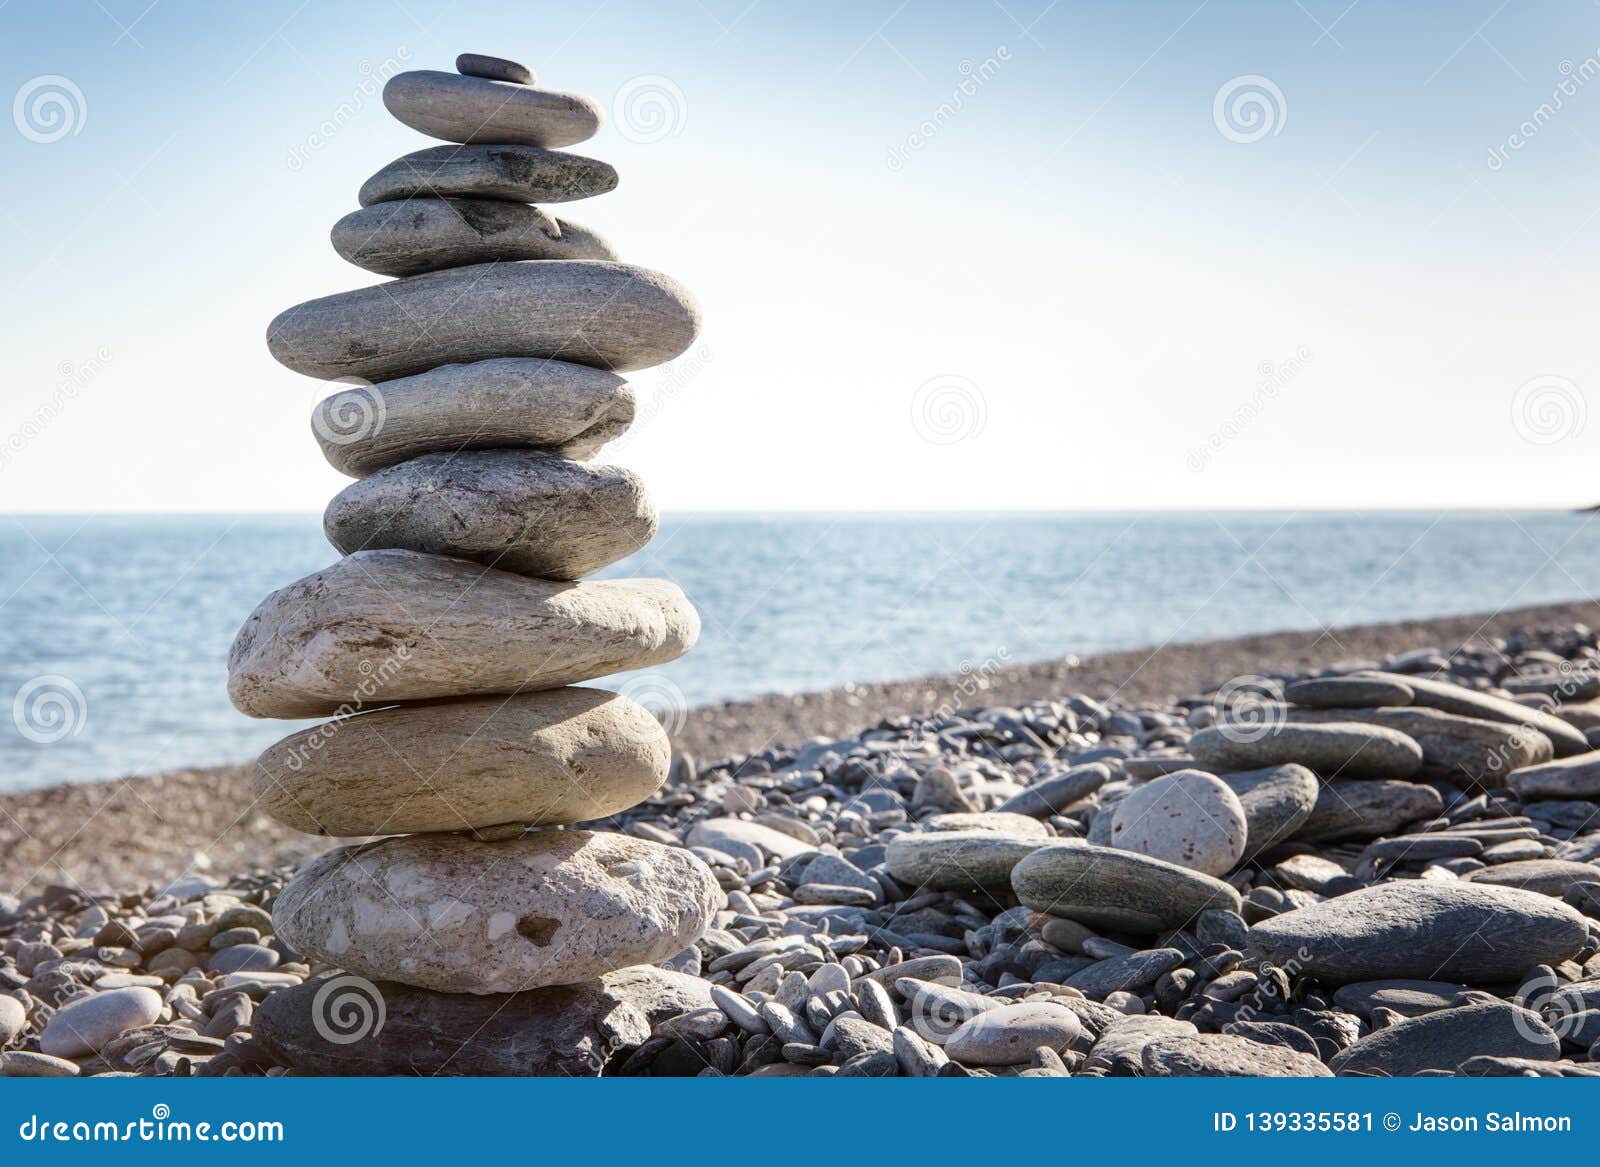 balancing stone on top of each other